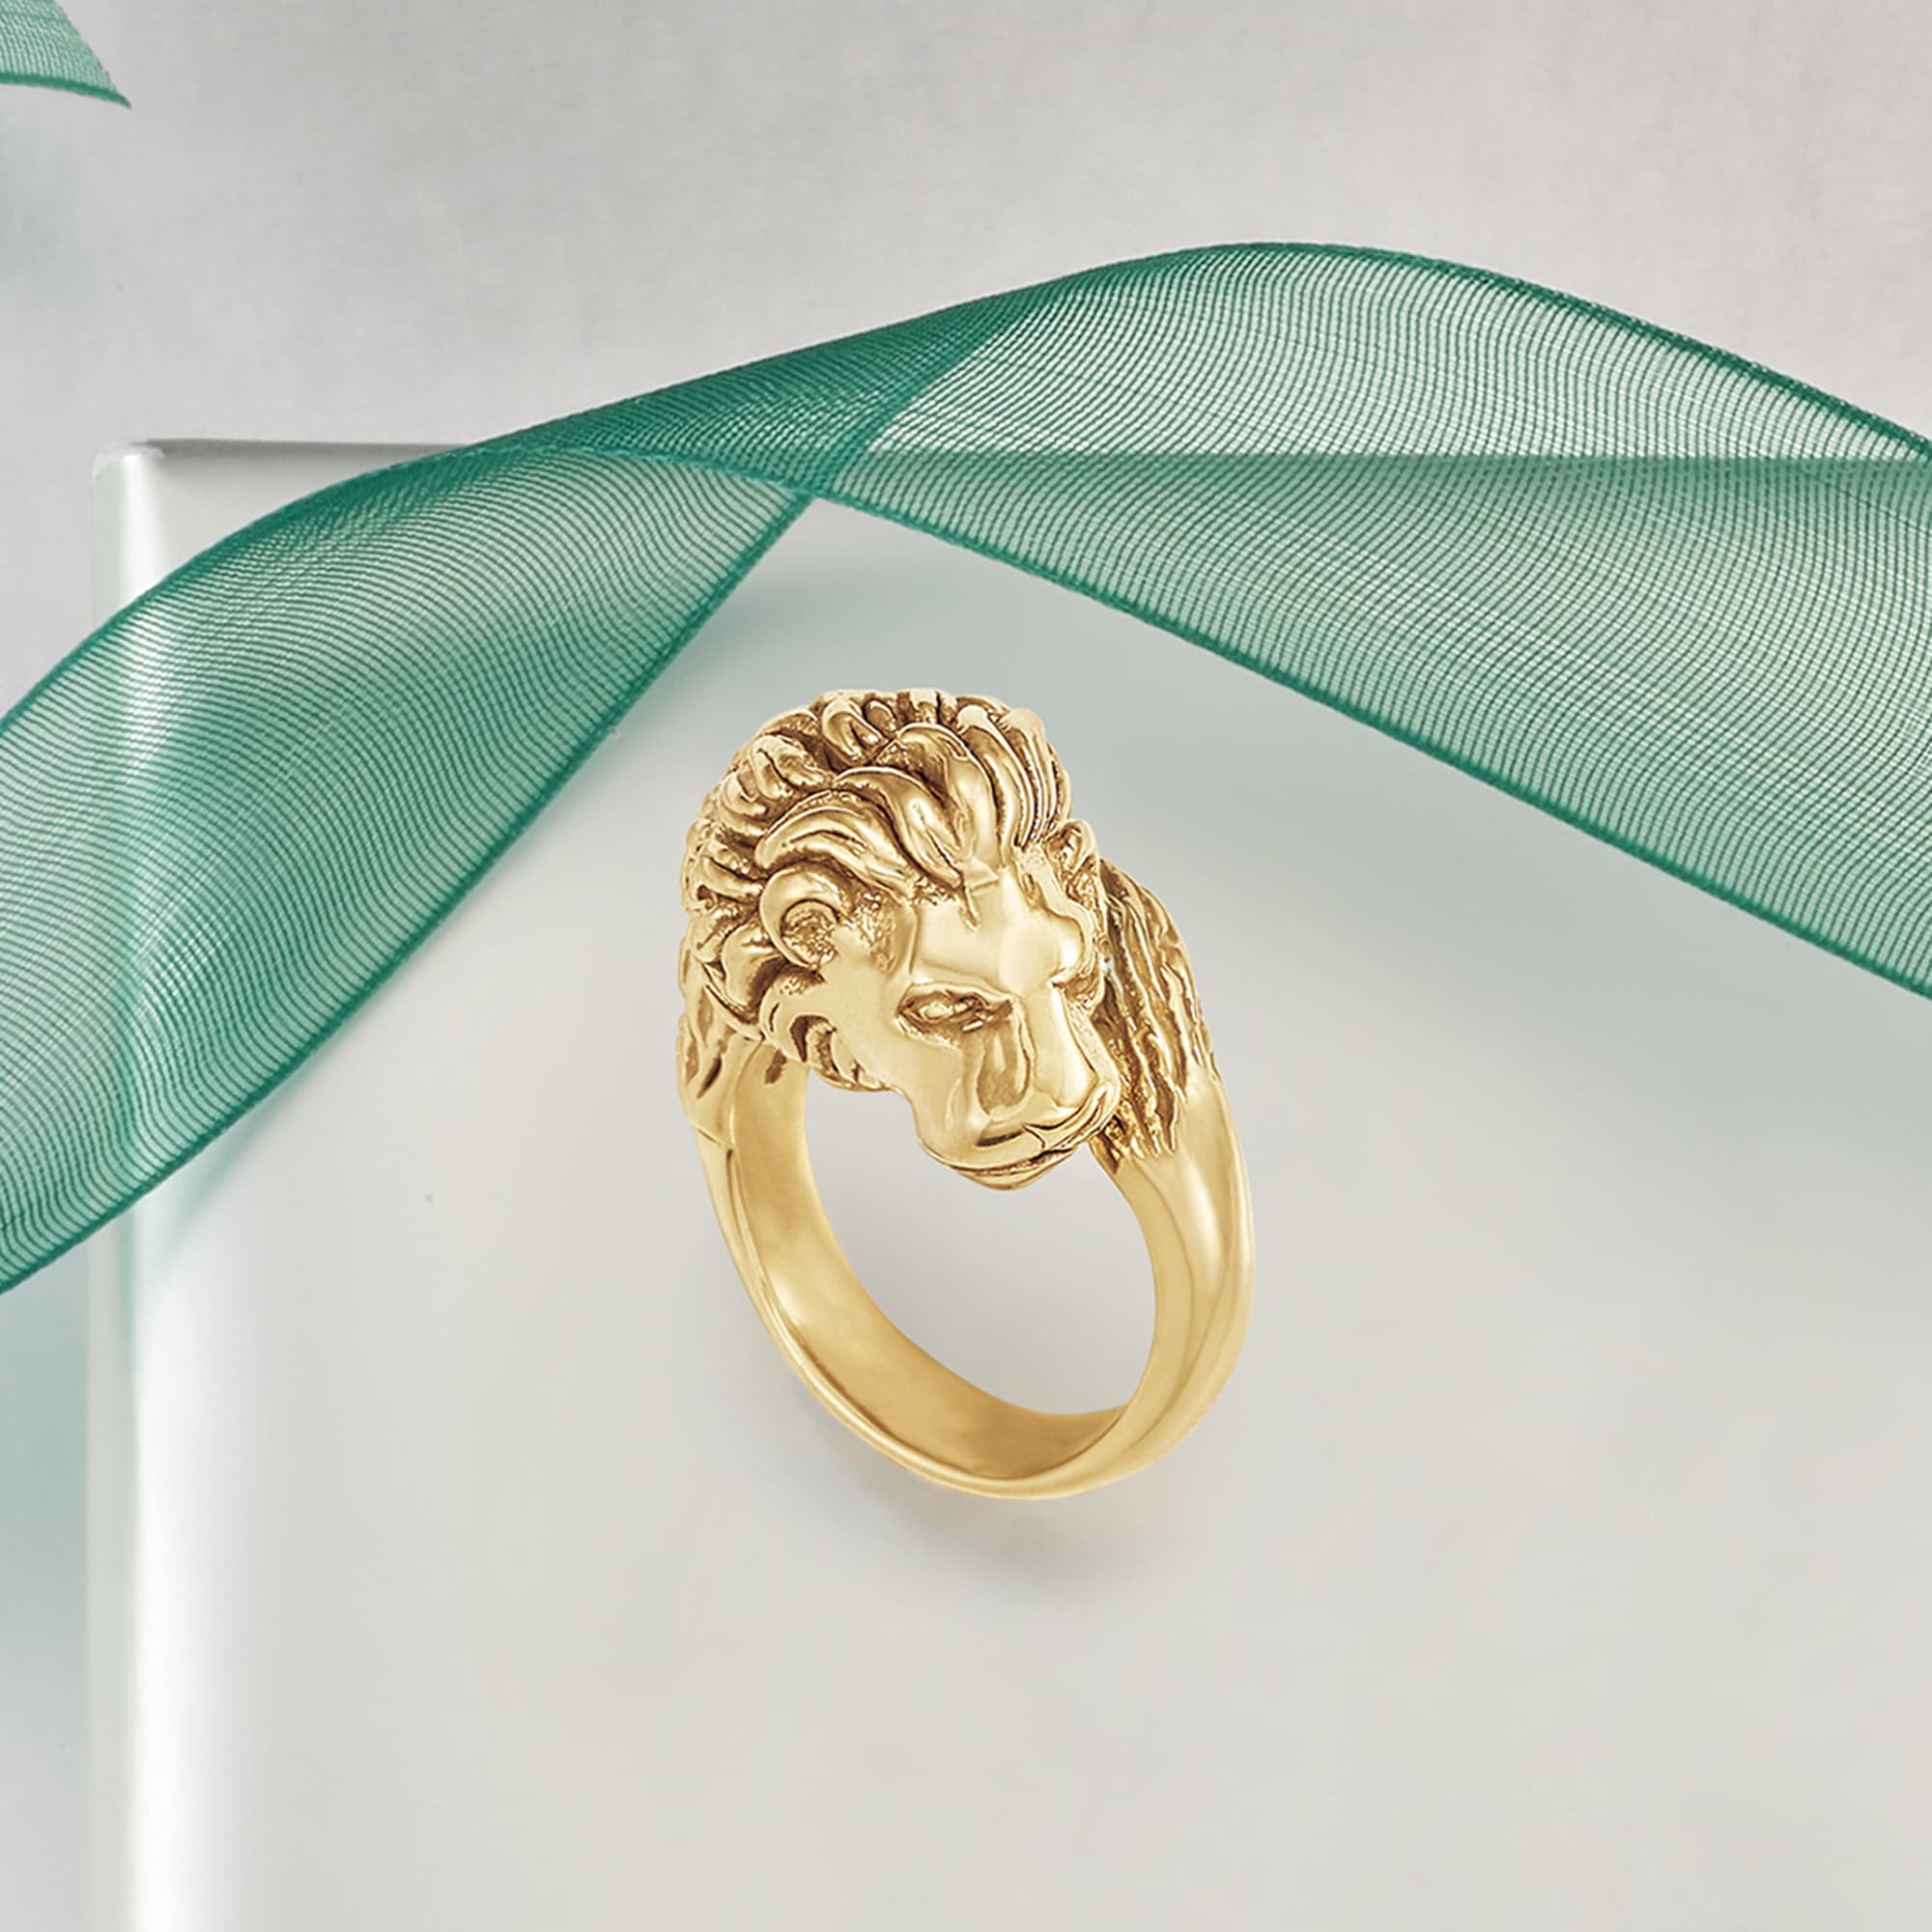 Solid 14K Yellow Gold Mens Lion Ring with Diamond Eyes Size 5 - 15 | eBay